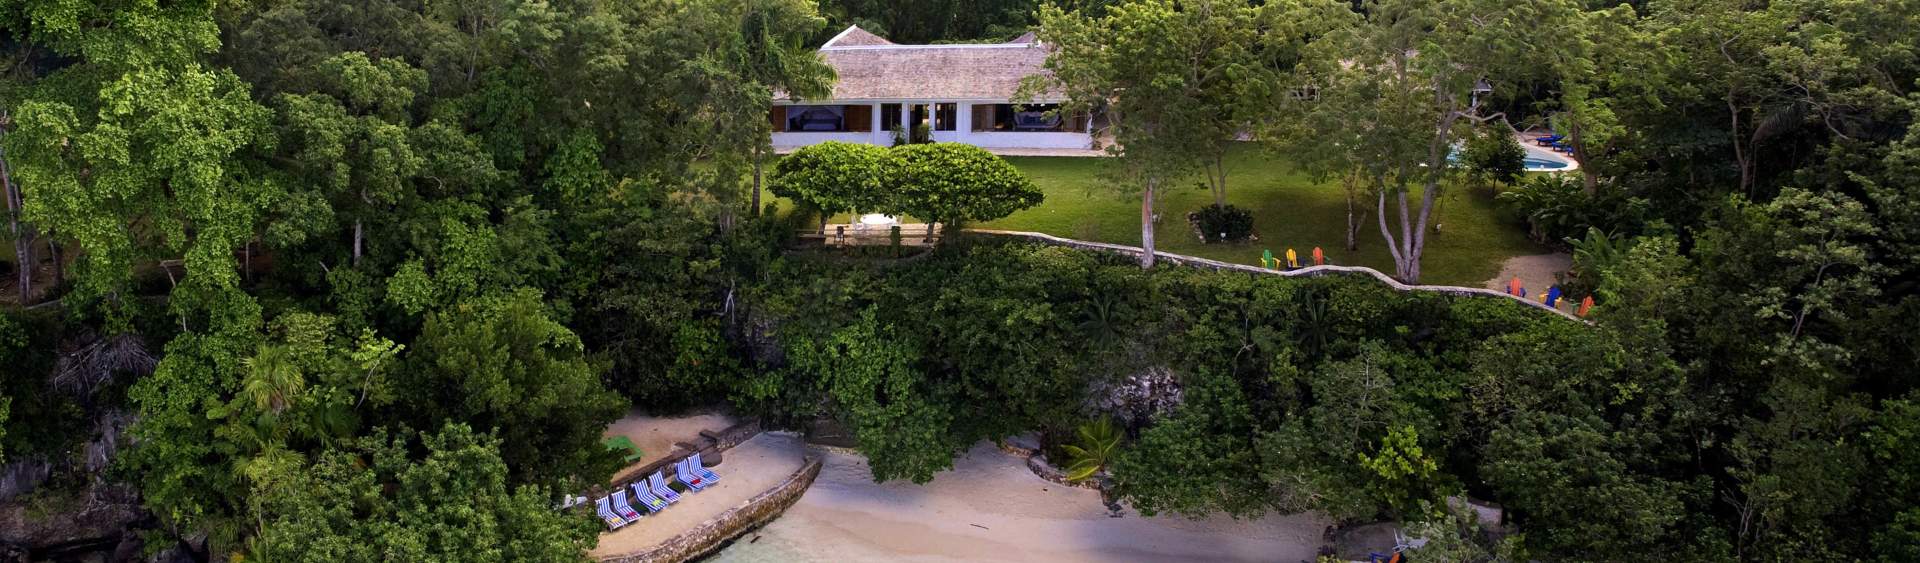 Bond author Ian Fleming's tropical home where No Time To Die was